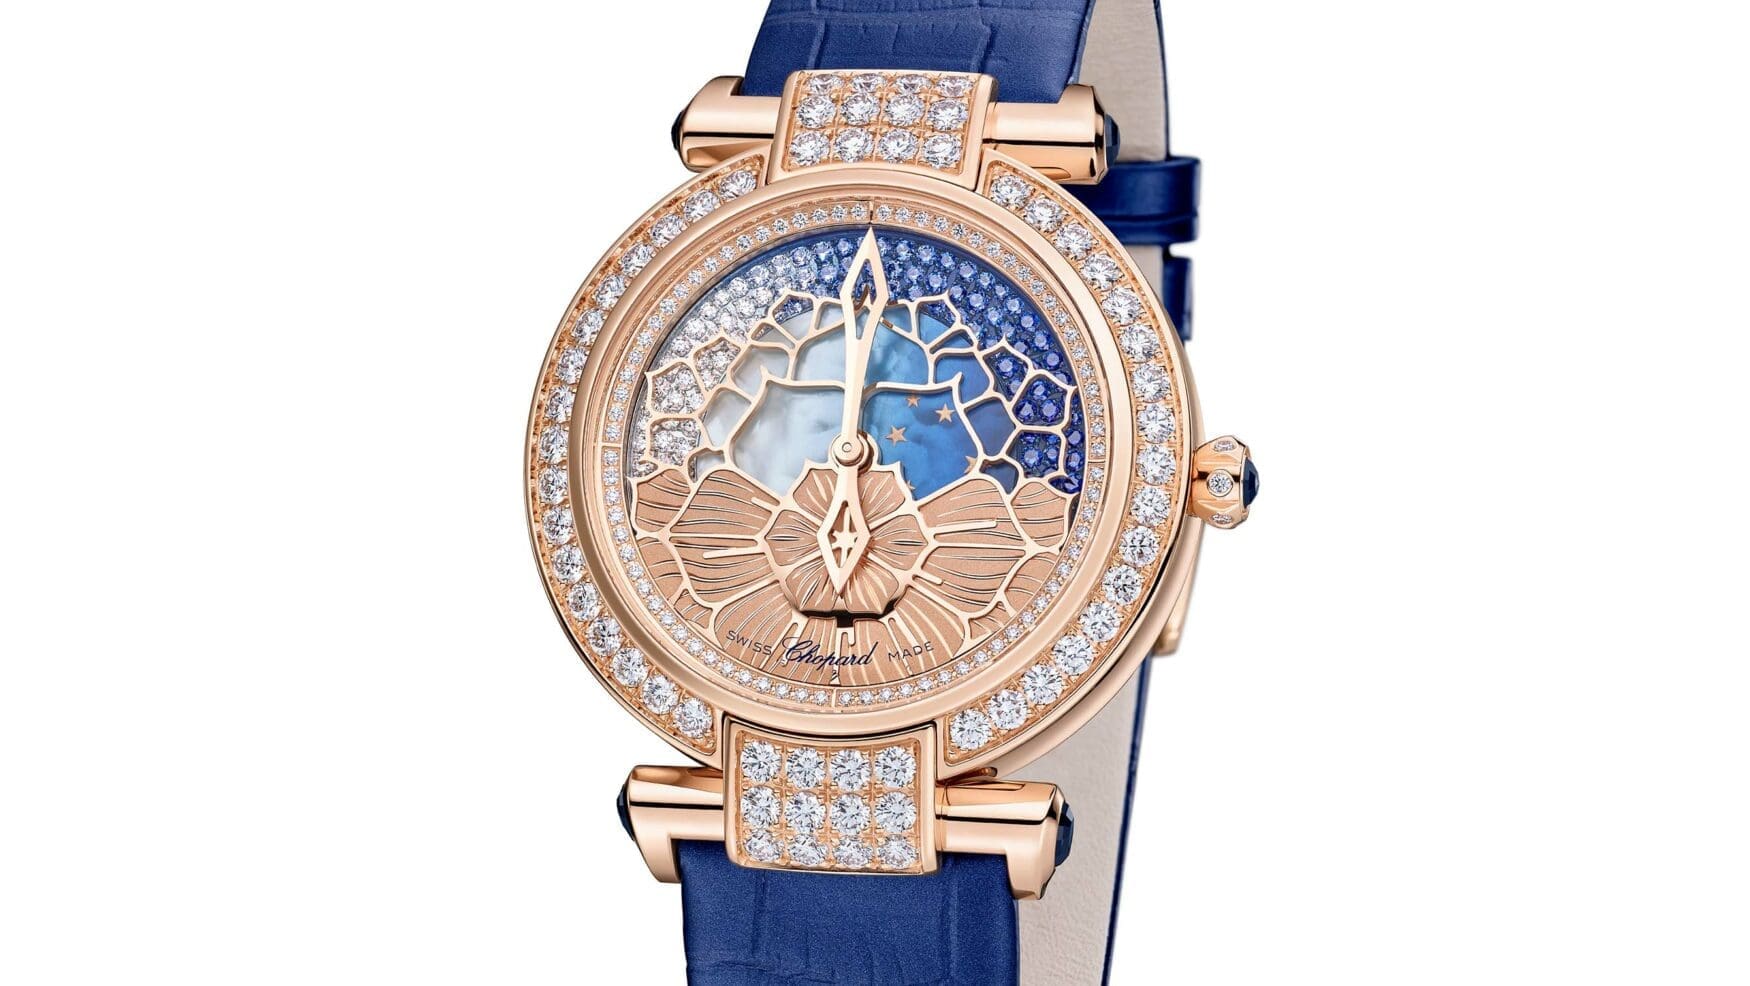 The Chopard IMPERIALE delivers an exquisite dial that you won’t forget